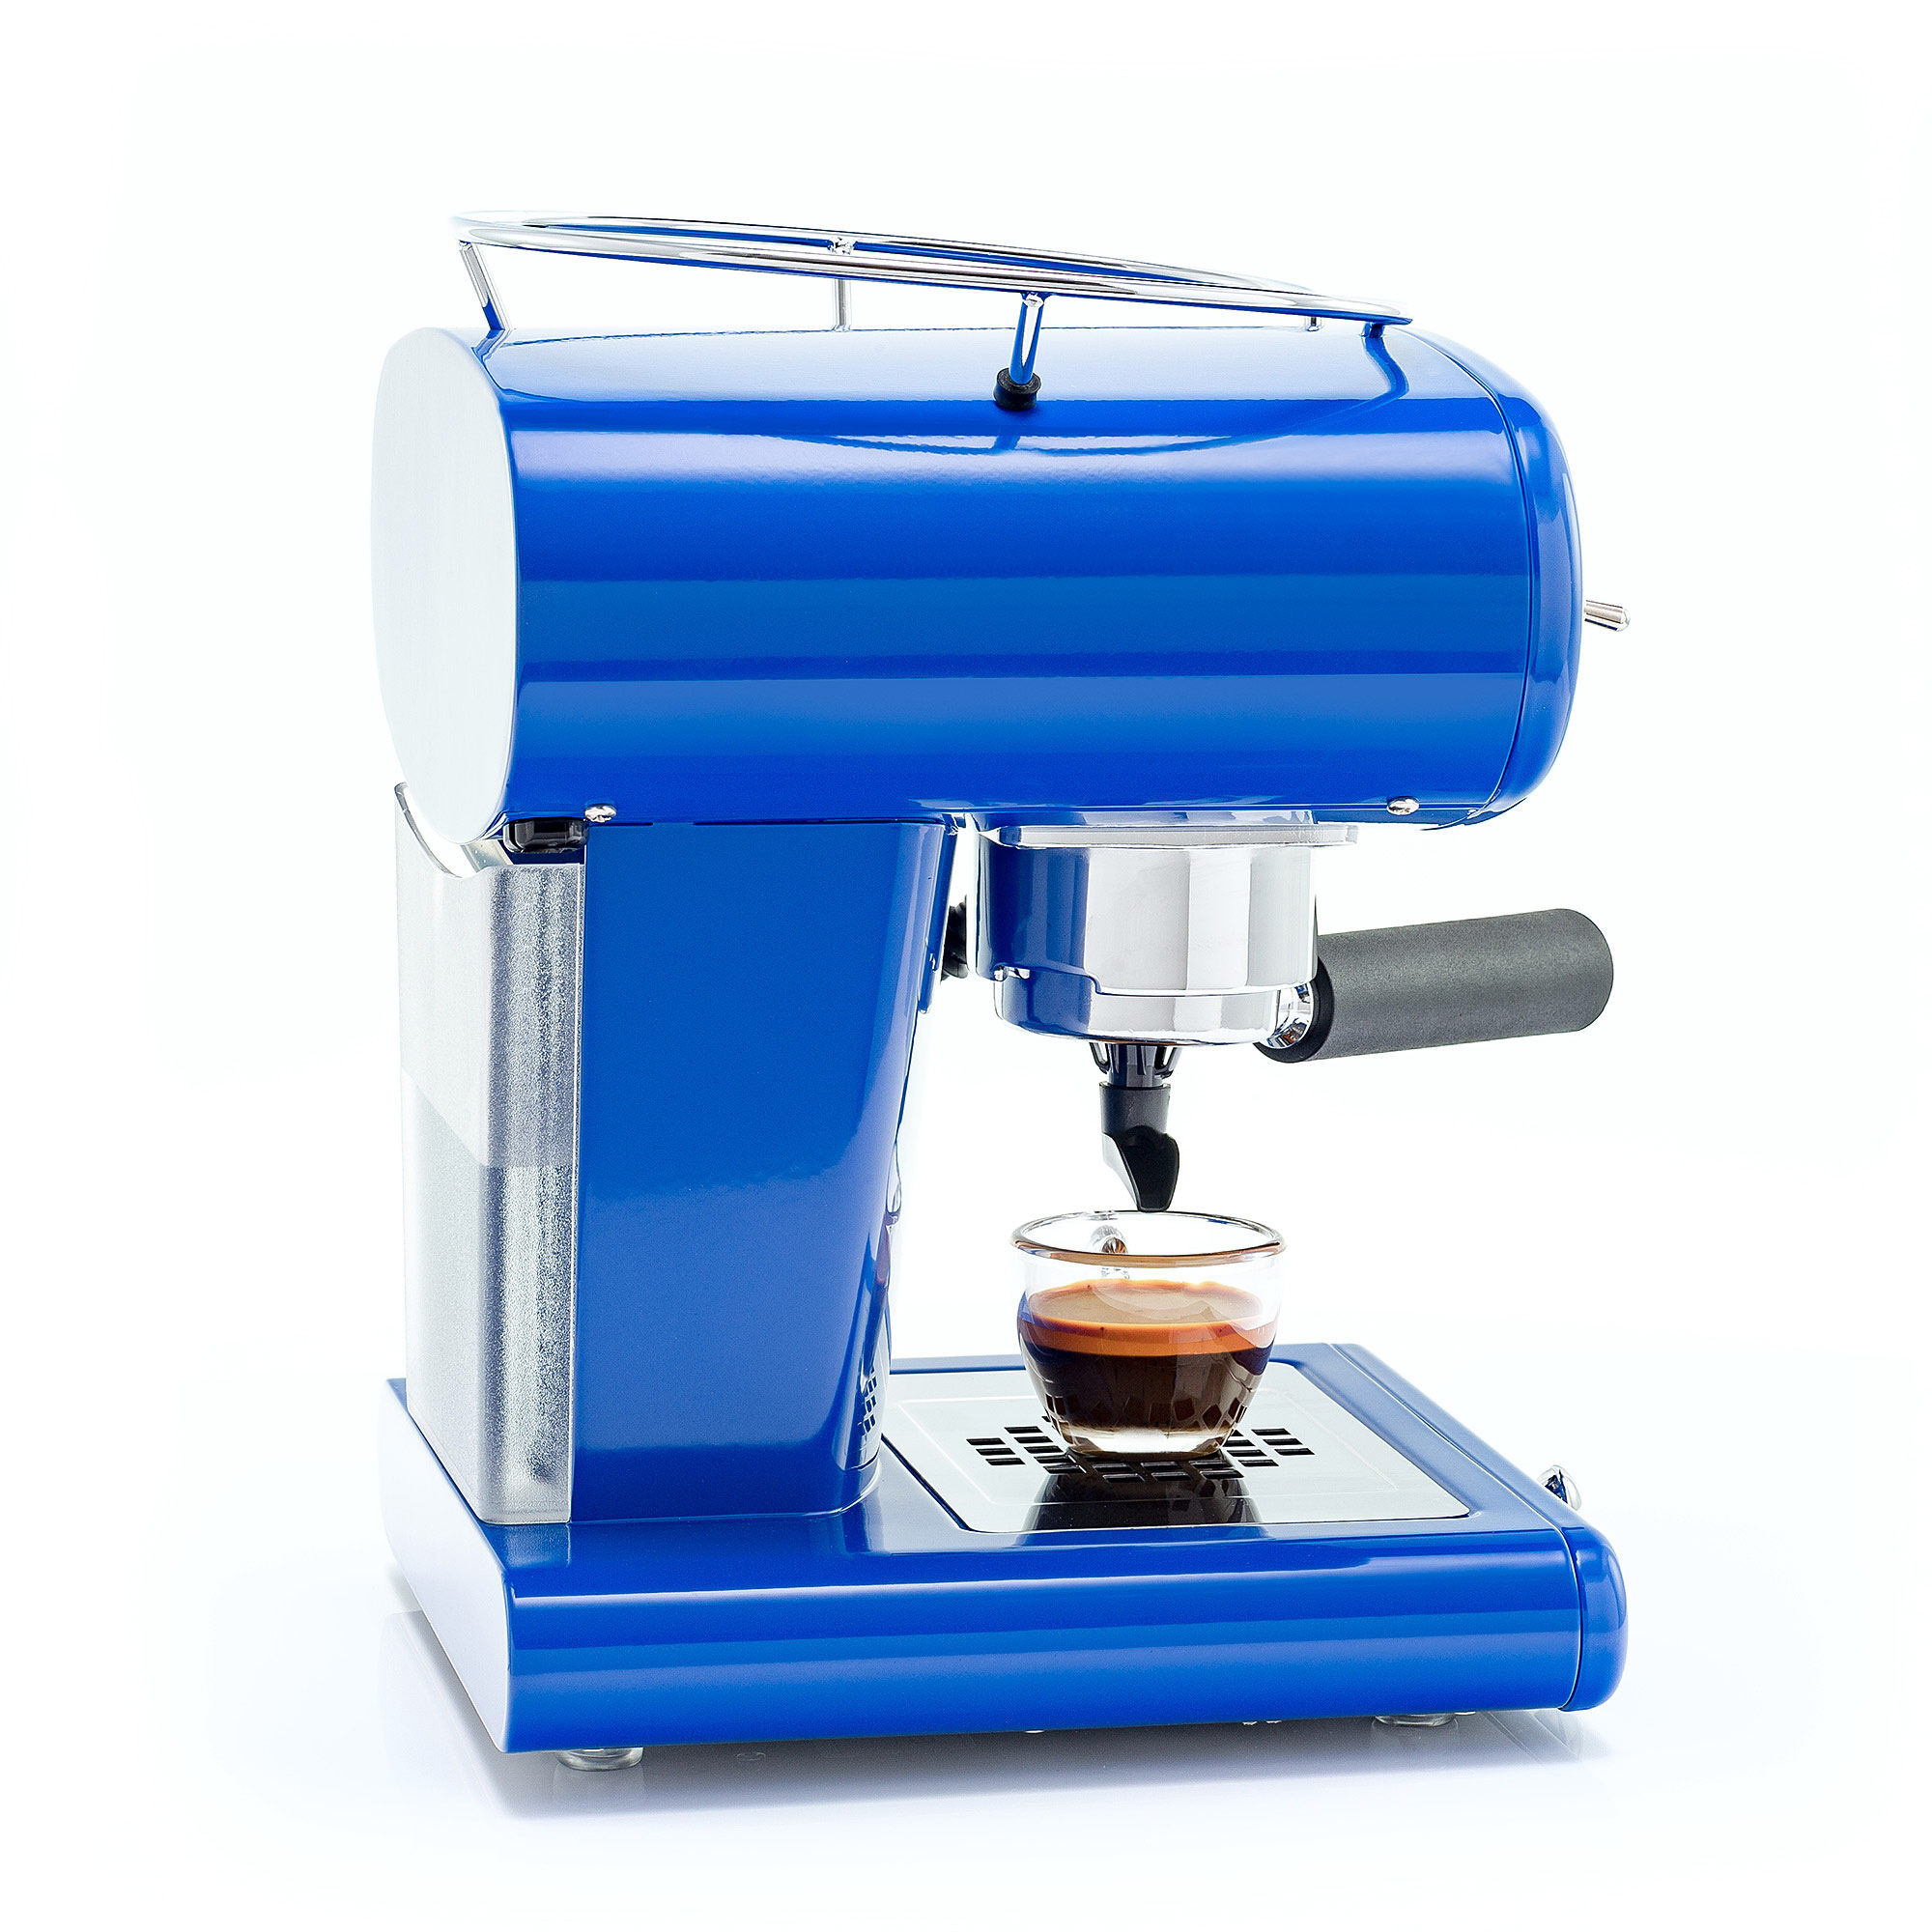 X1 Trio - koffiemachine voor E.S.E. koffiepads